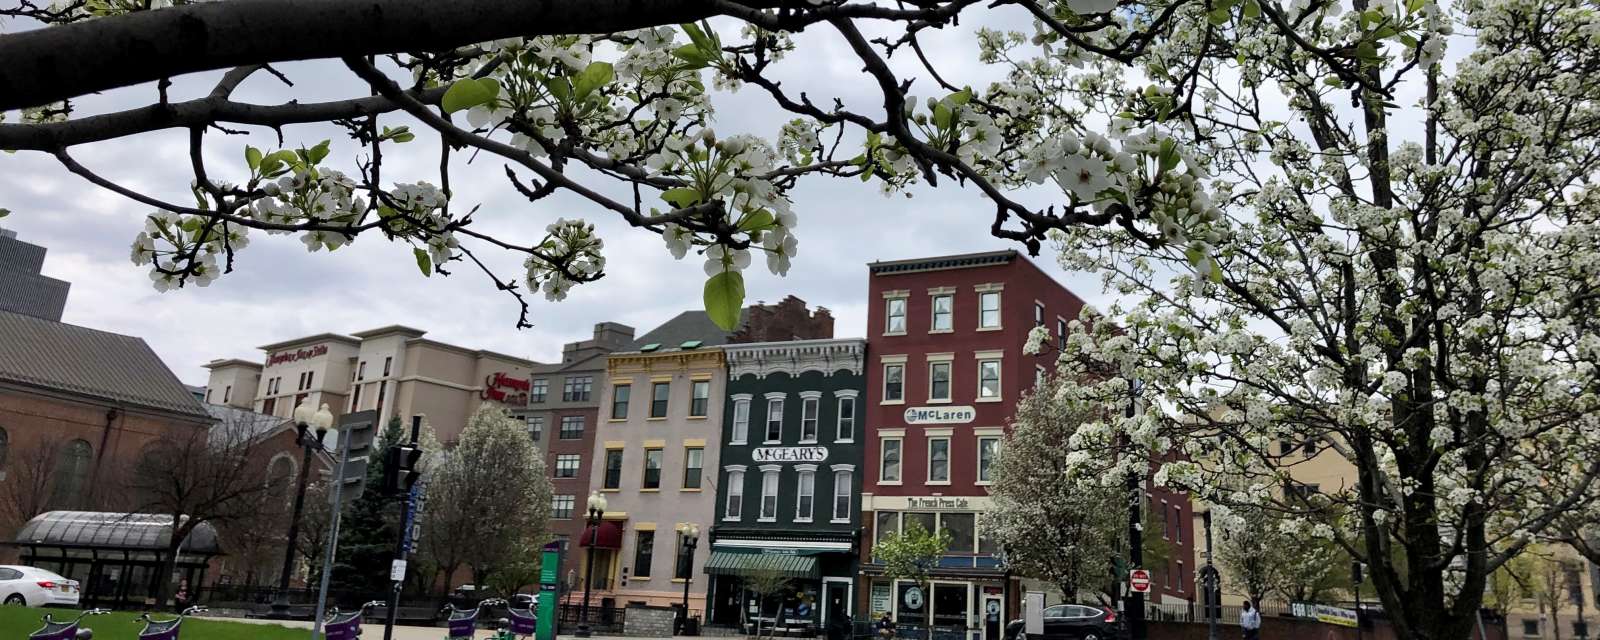 Spring blooms in downtown Albany